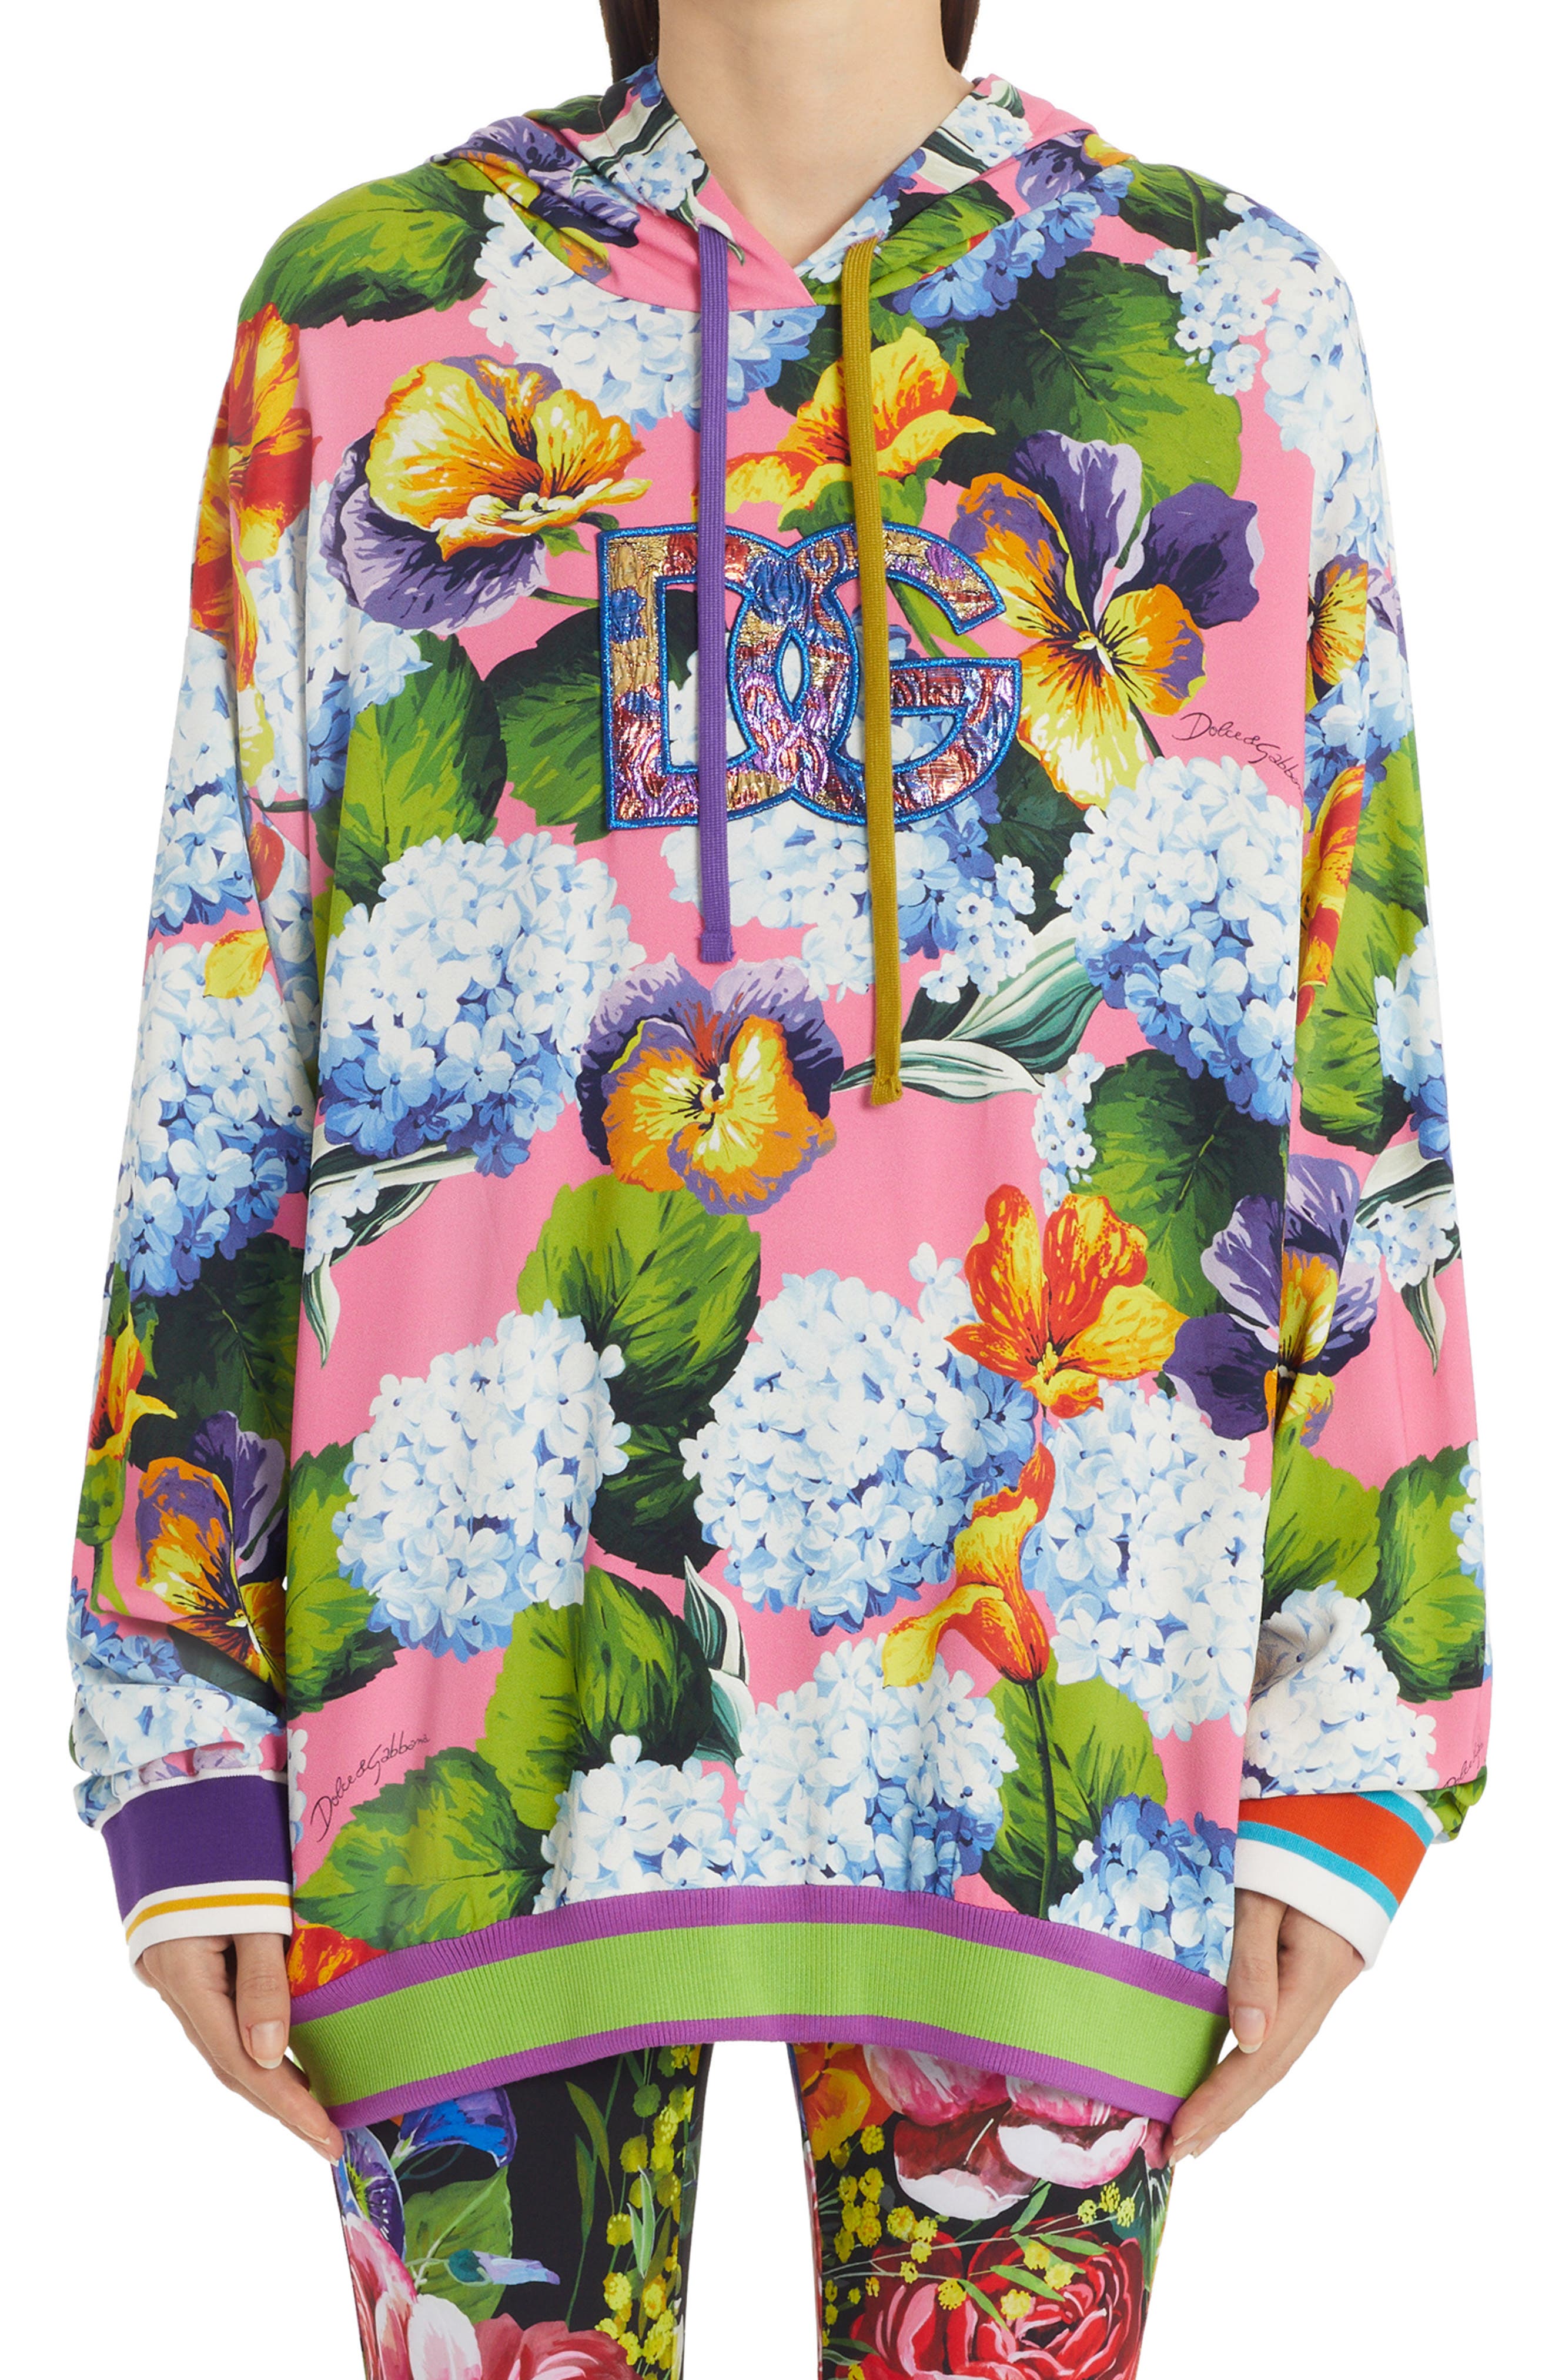 Dolce & Gabbana Floral Print Cady Hoodie in Ortensie/Violette at Nordstrom, Size Small